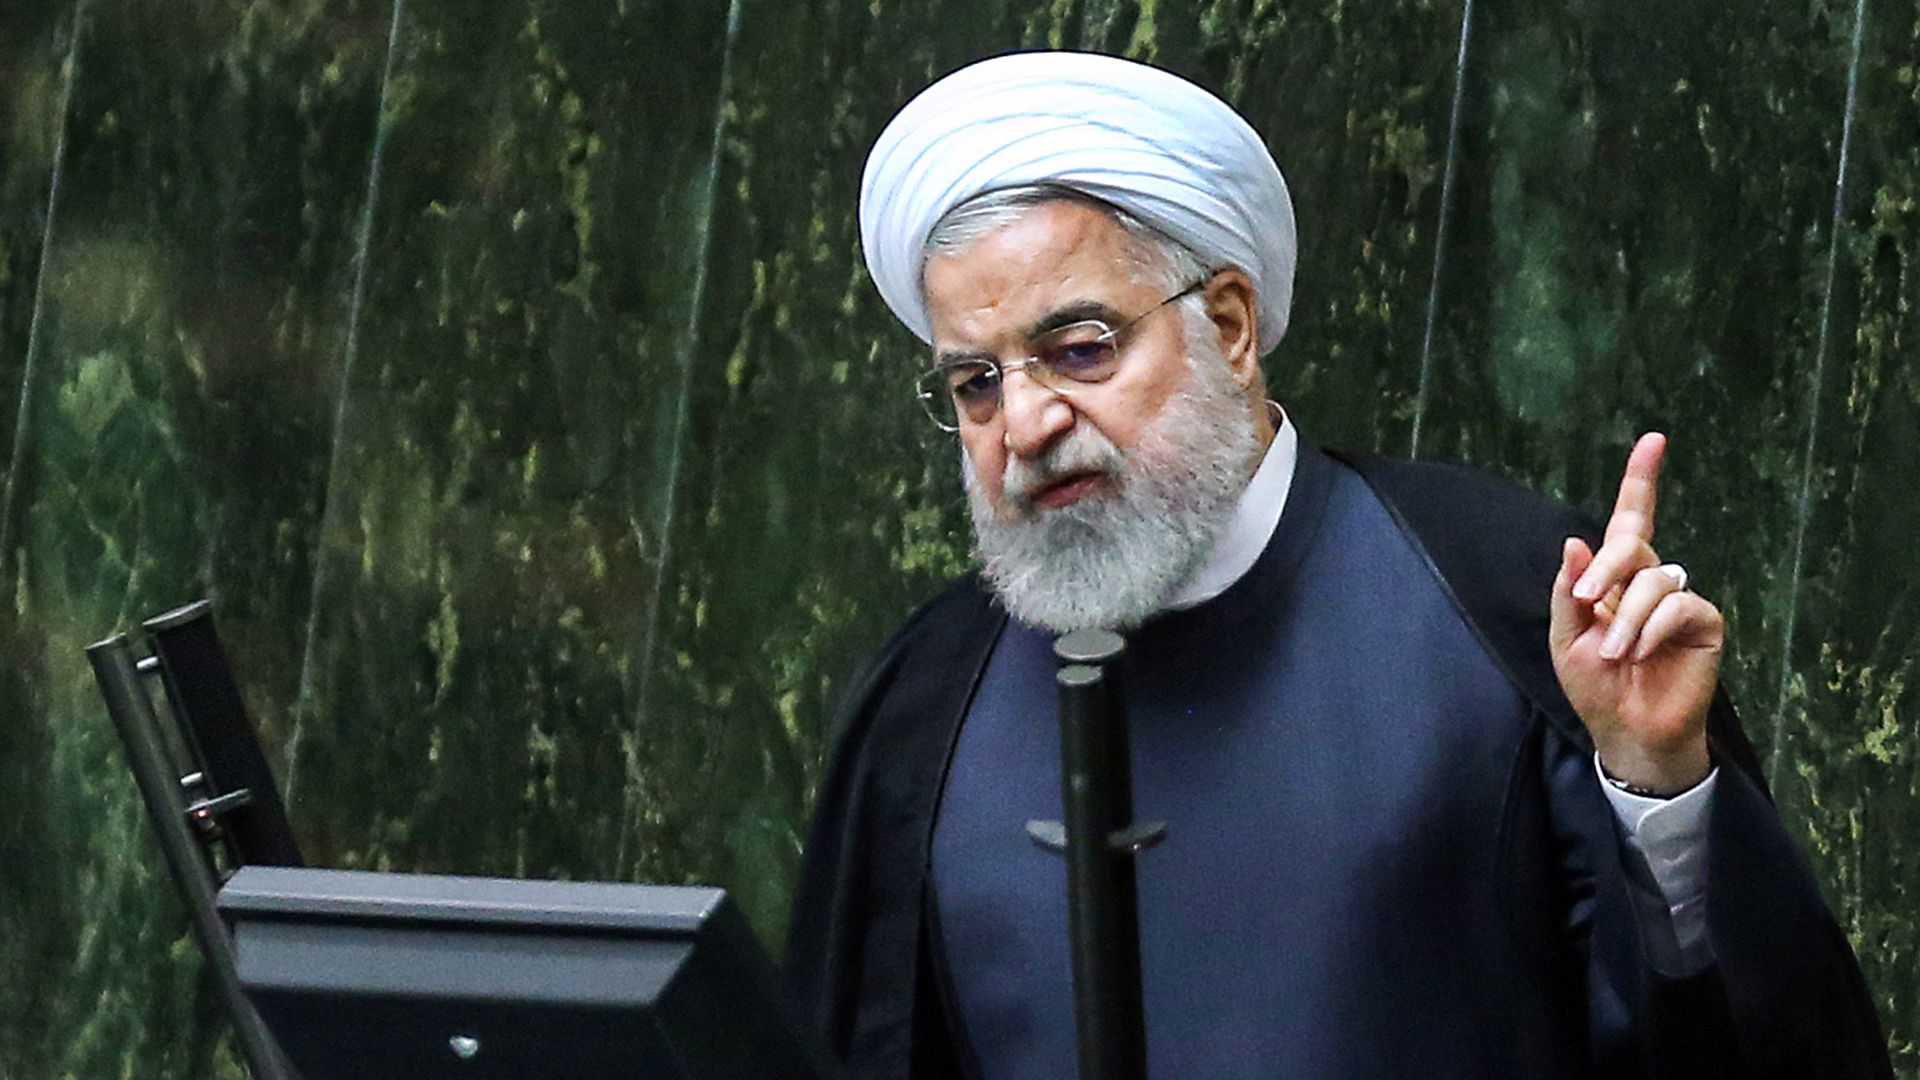 Iran's President Hassan Rouhani speaks at parliament in the capital Tehran on September 3